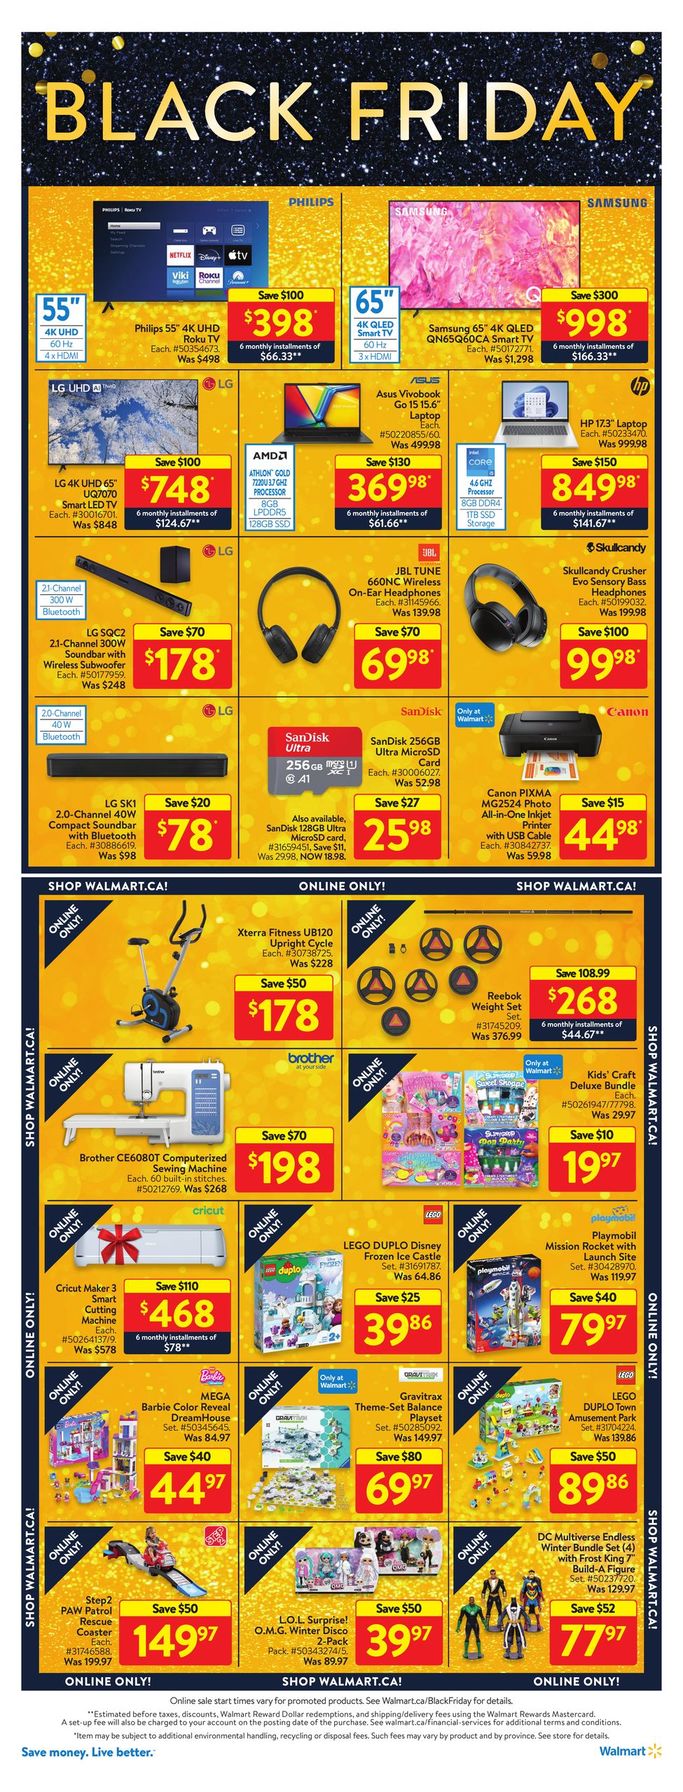 Walmart Canada Black Friday 2023 Sale Starting ONLINE Today at 9:00 pm -  Canadian Freebies, Coupons, Deals, Bargains, Flyers, Contests Canada  Canadian Freebies, Coupons, Deals, Bargains, Flyers, Contests Canada